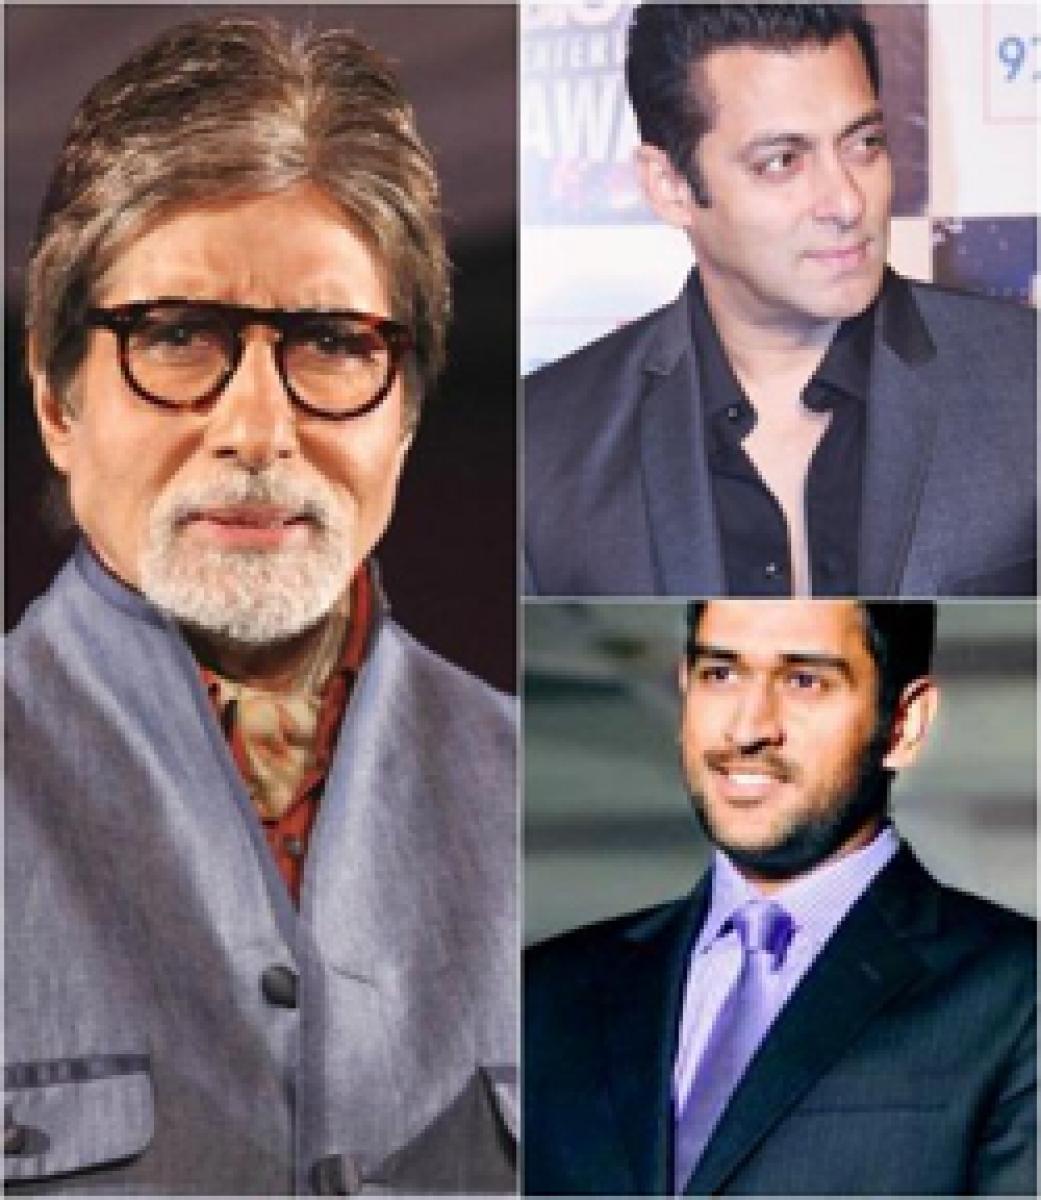 Forbes Worlds highest paid celebrities list has Amitabh, Dhoni and Salman Khan